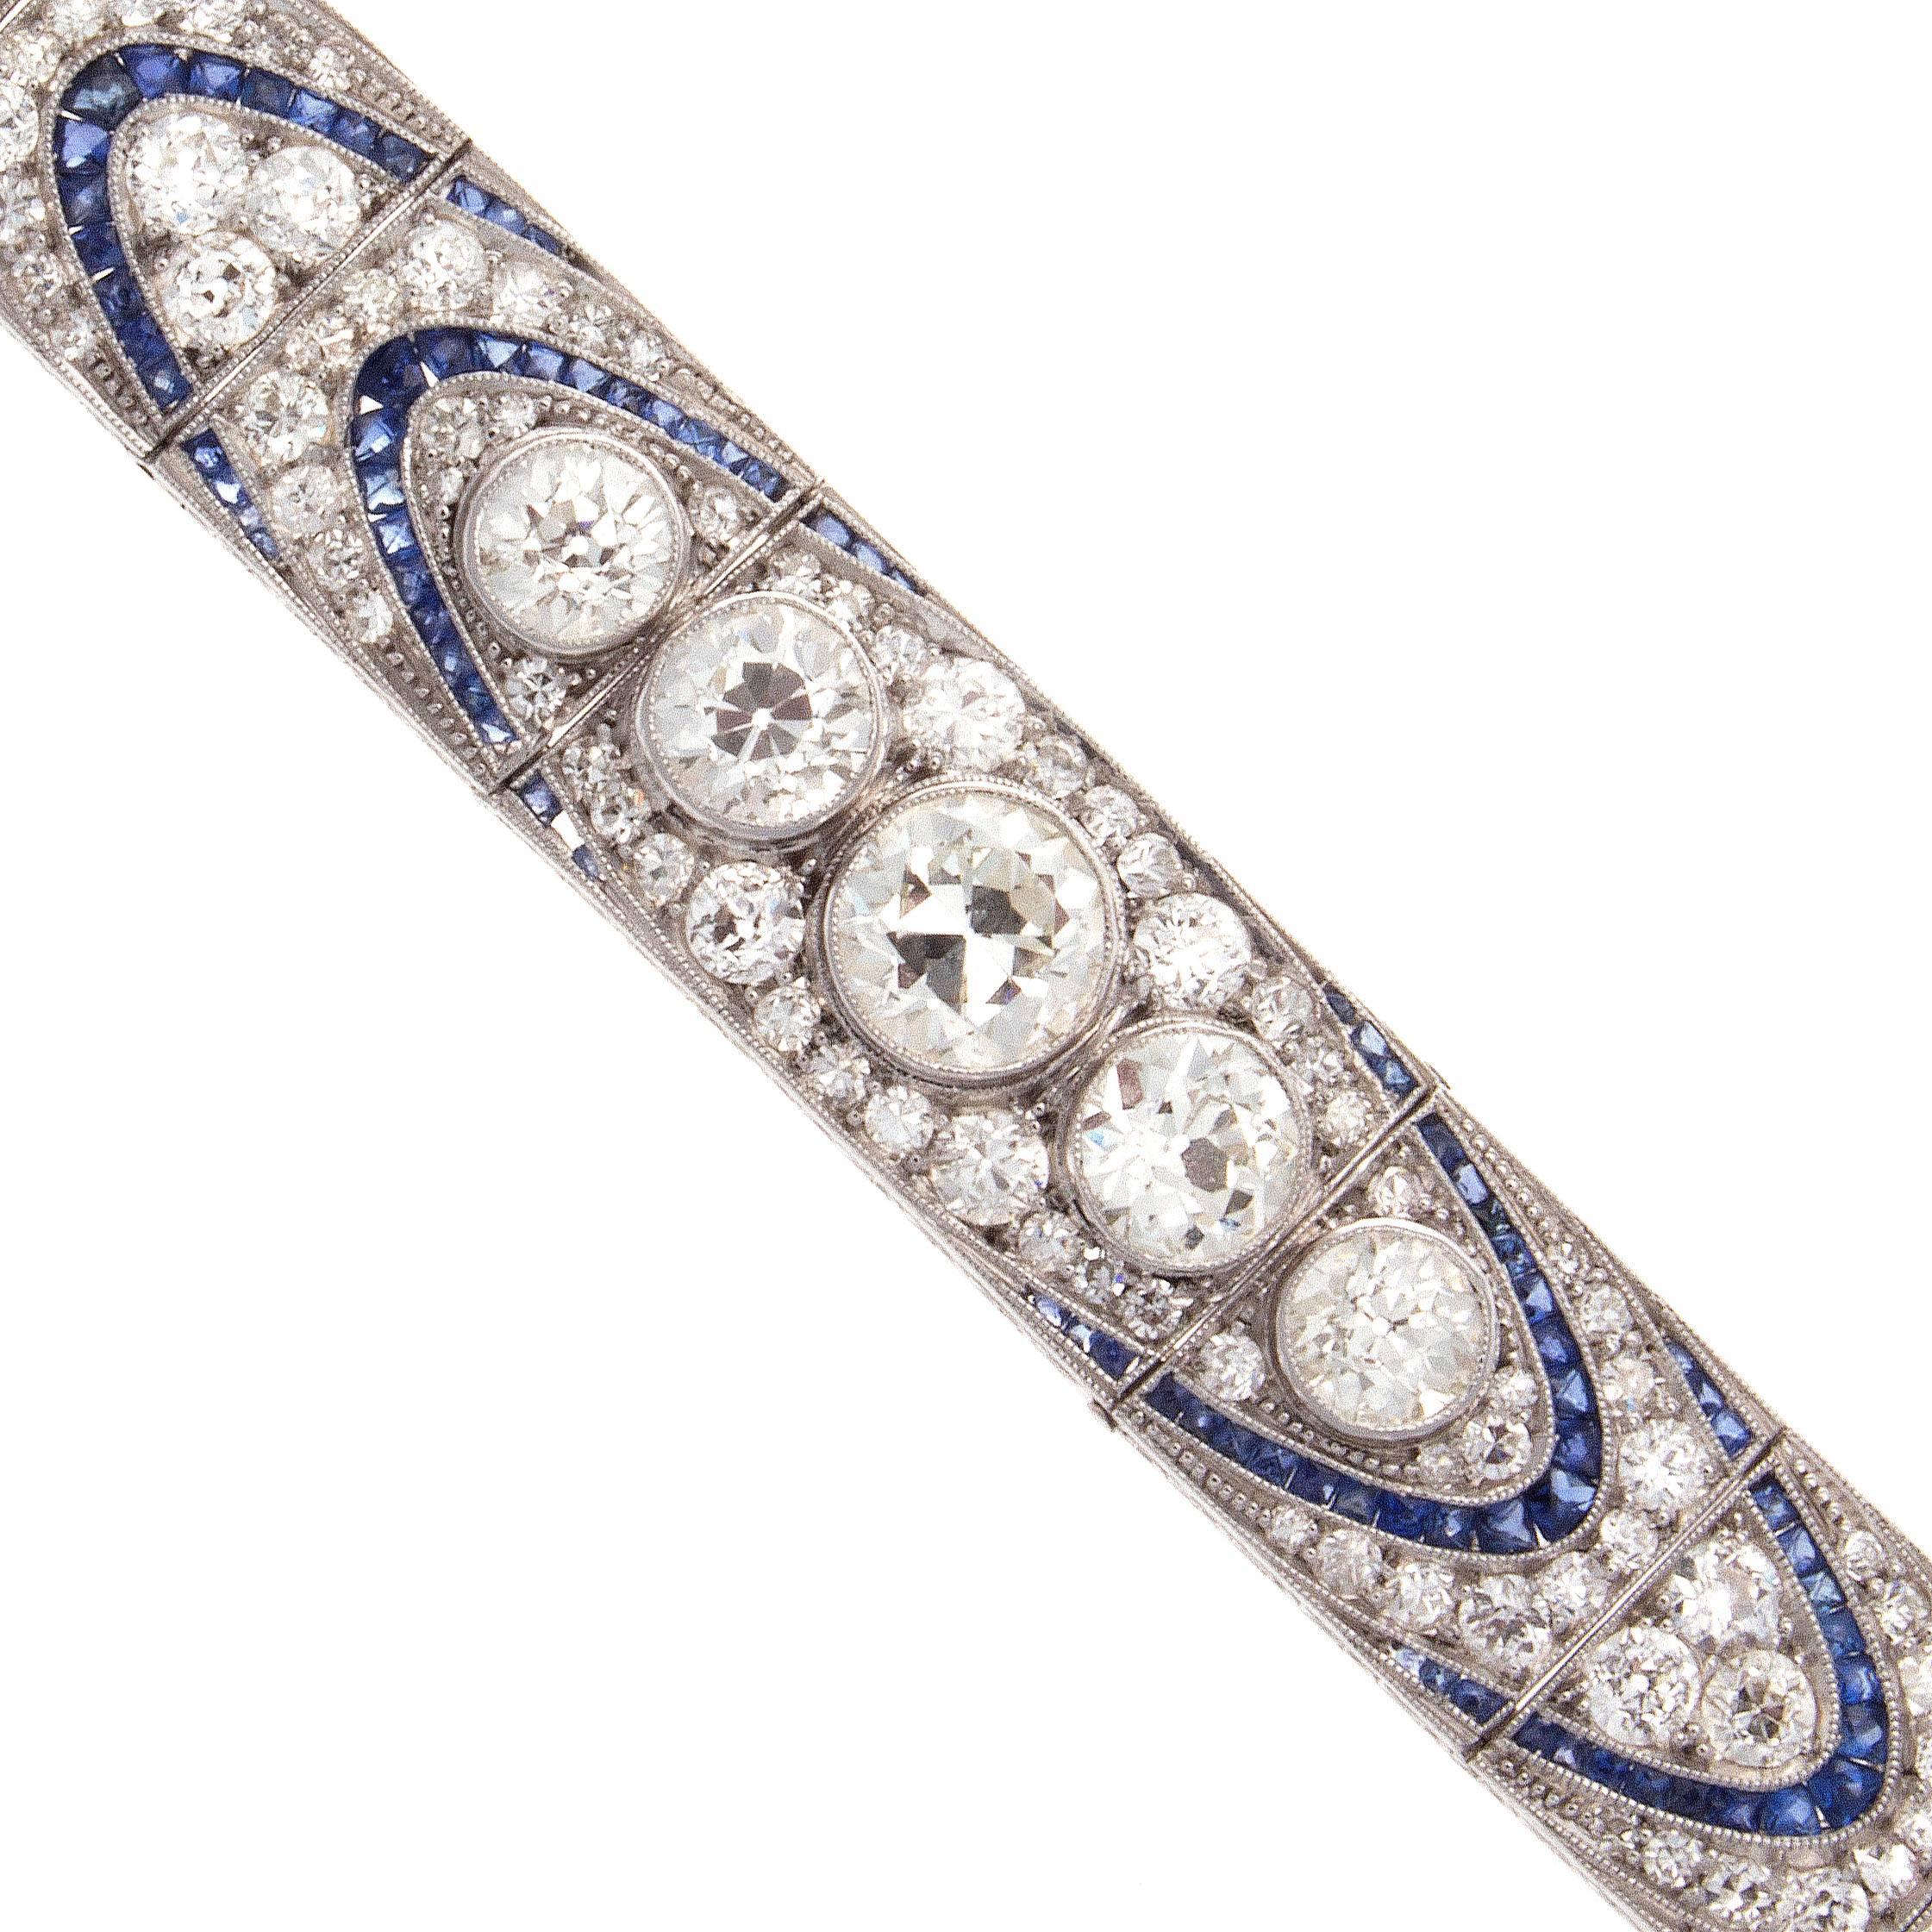 An  art deco classic using combinations of color to create this alluring bracelet. Designed with links of numerous perfectly matching white, clean diamonds and vibrant blue sapphires. Featuring 5 main old European cut diamonds that descend in size